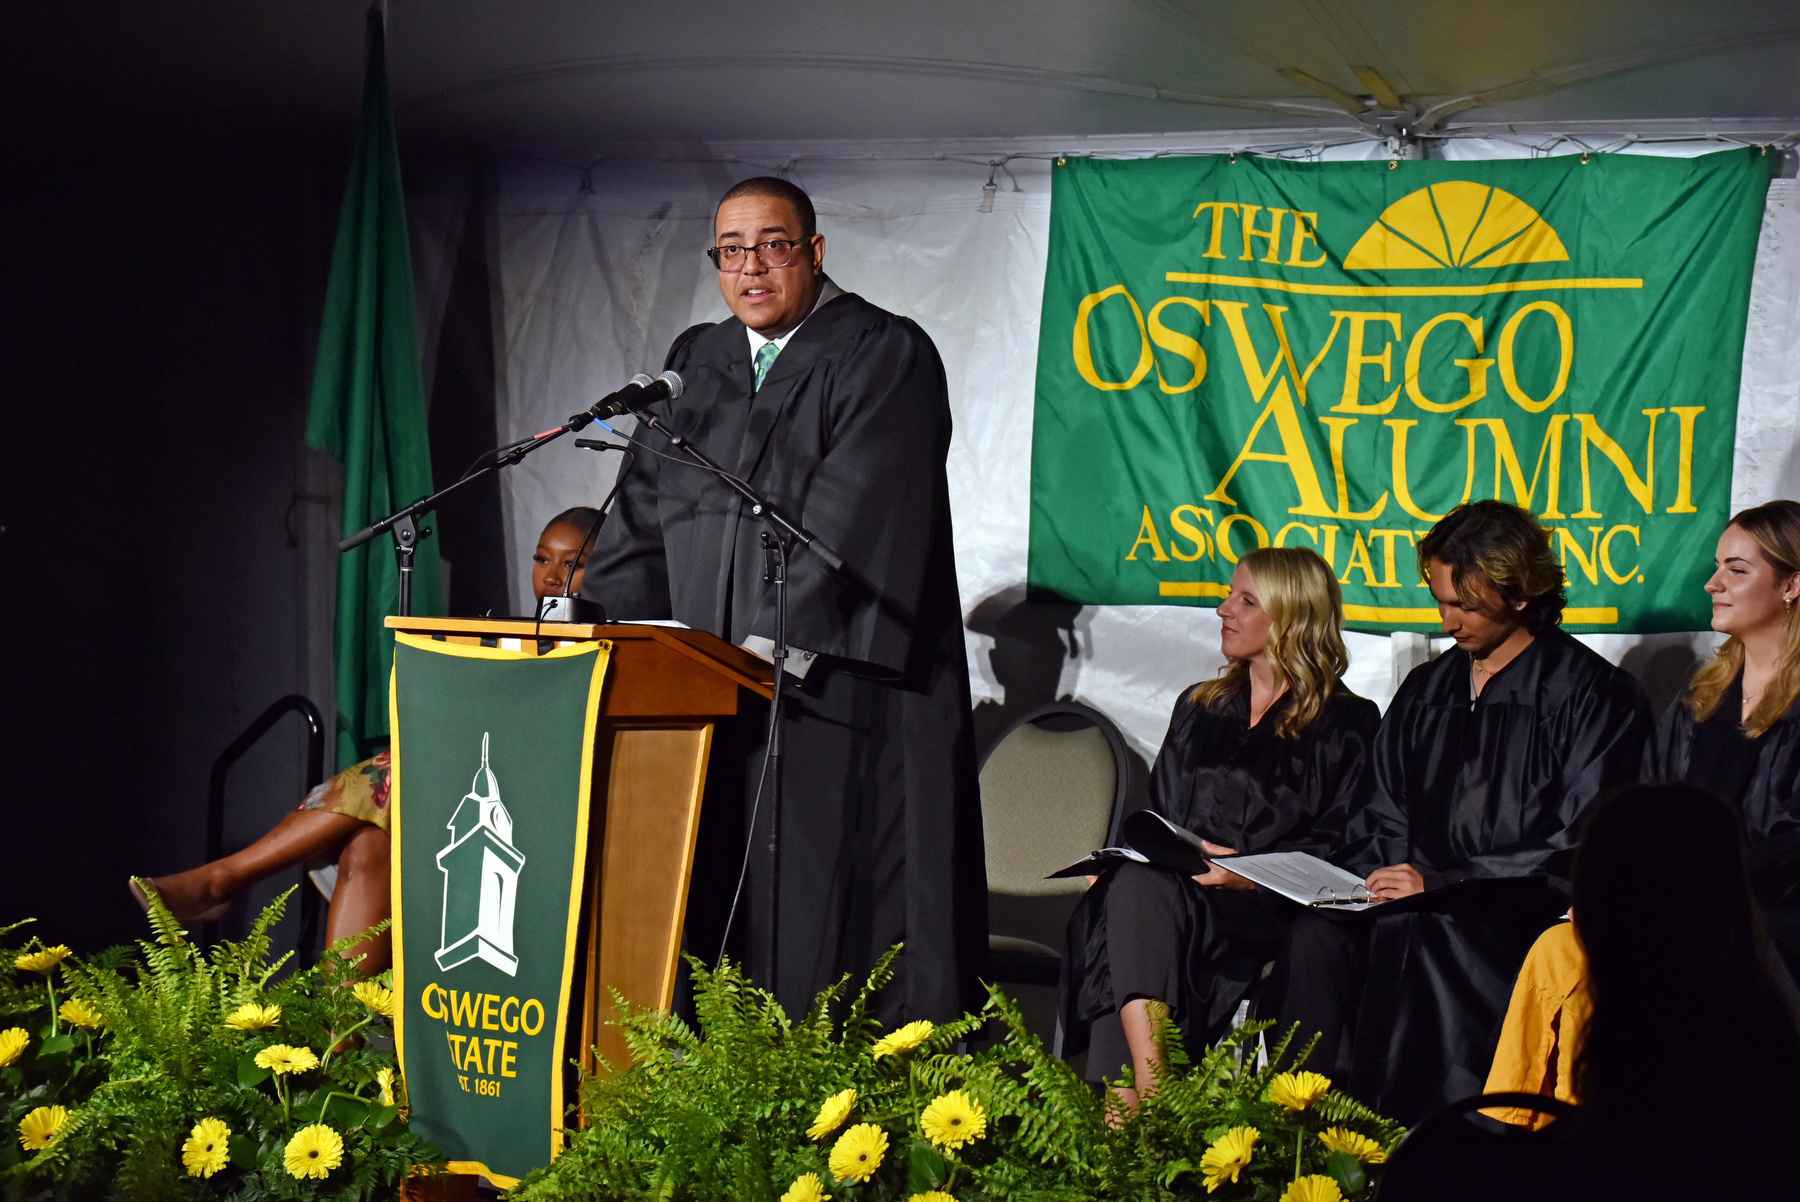 Gabriel Almanzar ’05, creative director for CBS News, delivered the keynote address at the 2023 Commencement Eve Torchlight Ceremony on May 12. The Torchlight Ceremony is one of Oswego’s long-standing traditions in which university leadership and other alumni pass the flame from the Torch of Learning to members of the graduating class, while welcoming these newest members of the Oswego Alumni Association. Almanzar earned a bachelor of fine arts in graphic arts with a minor in Spanish from SUNY Oswego